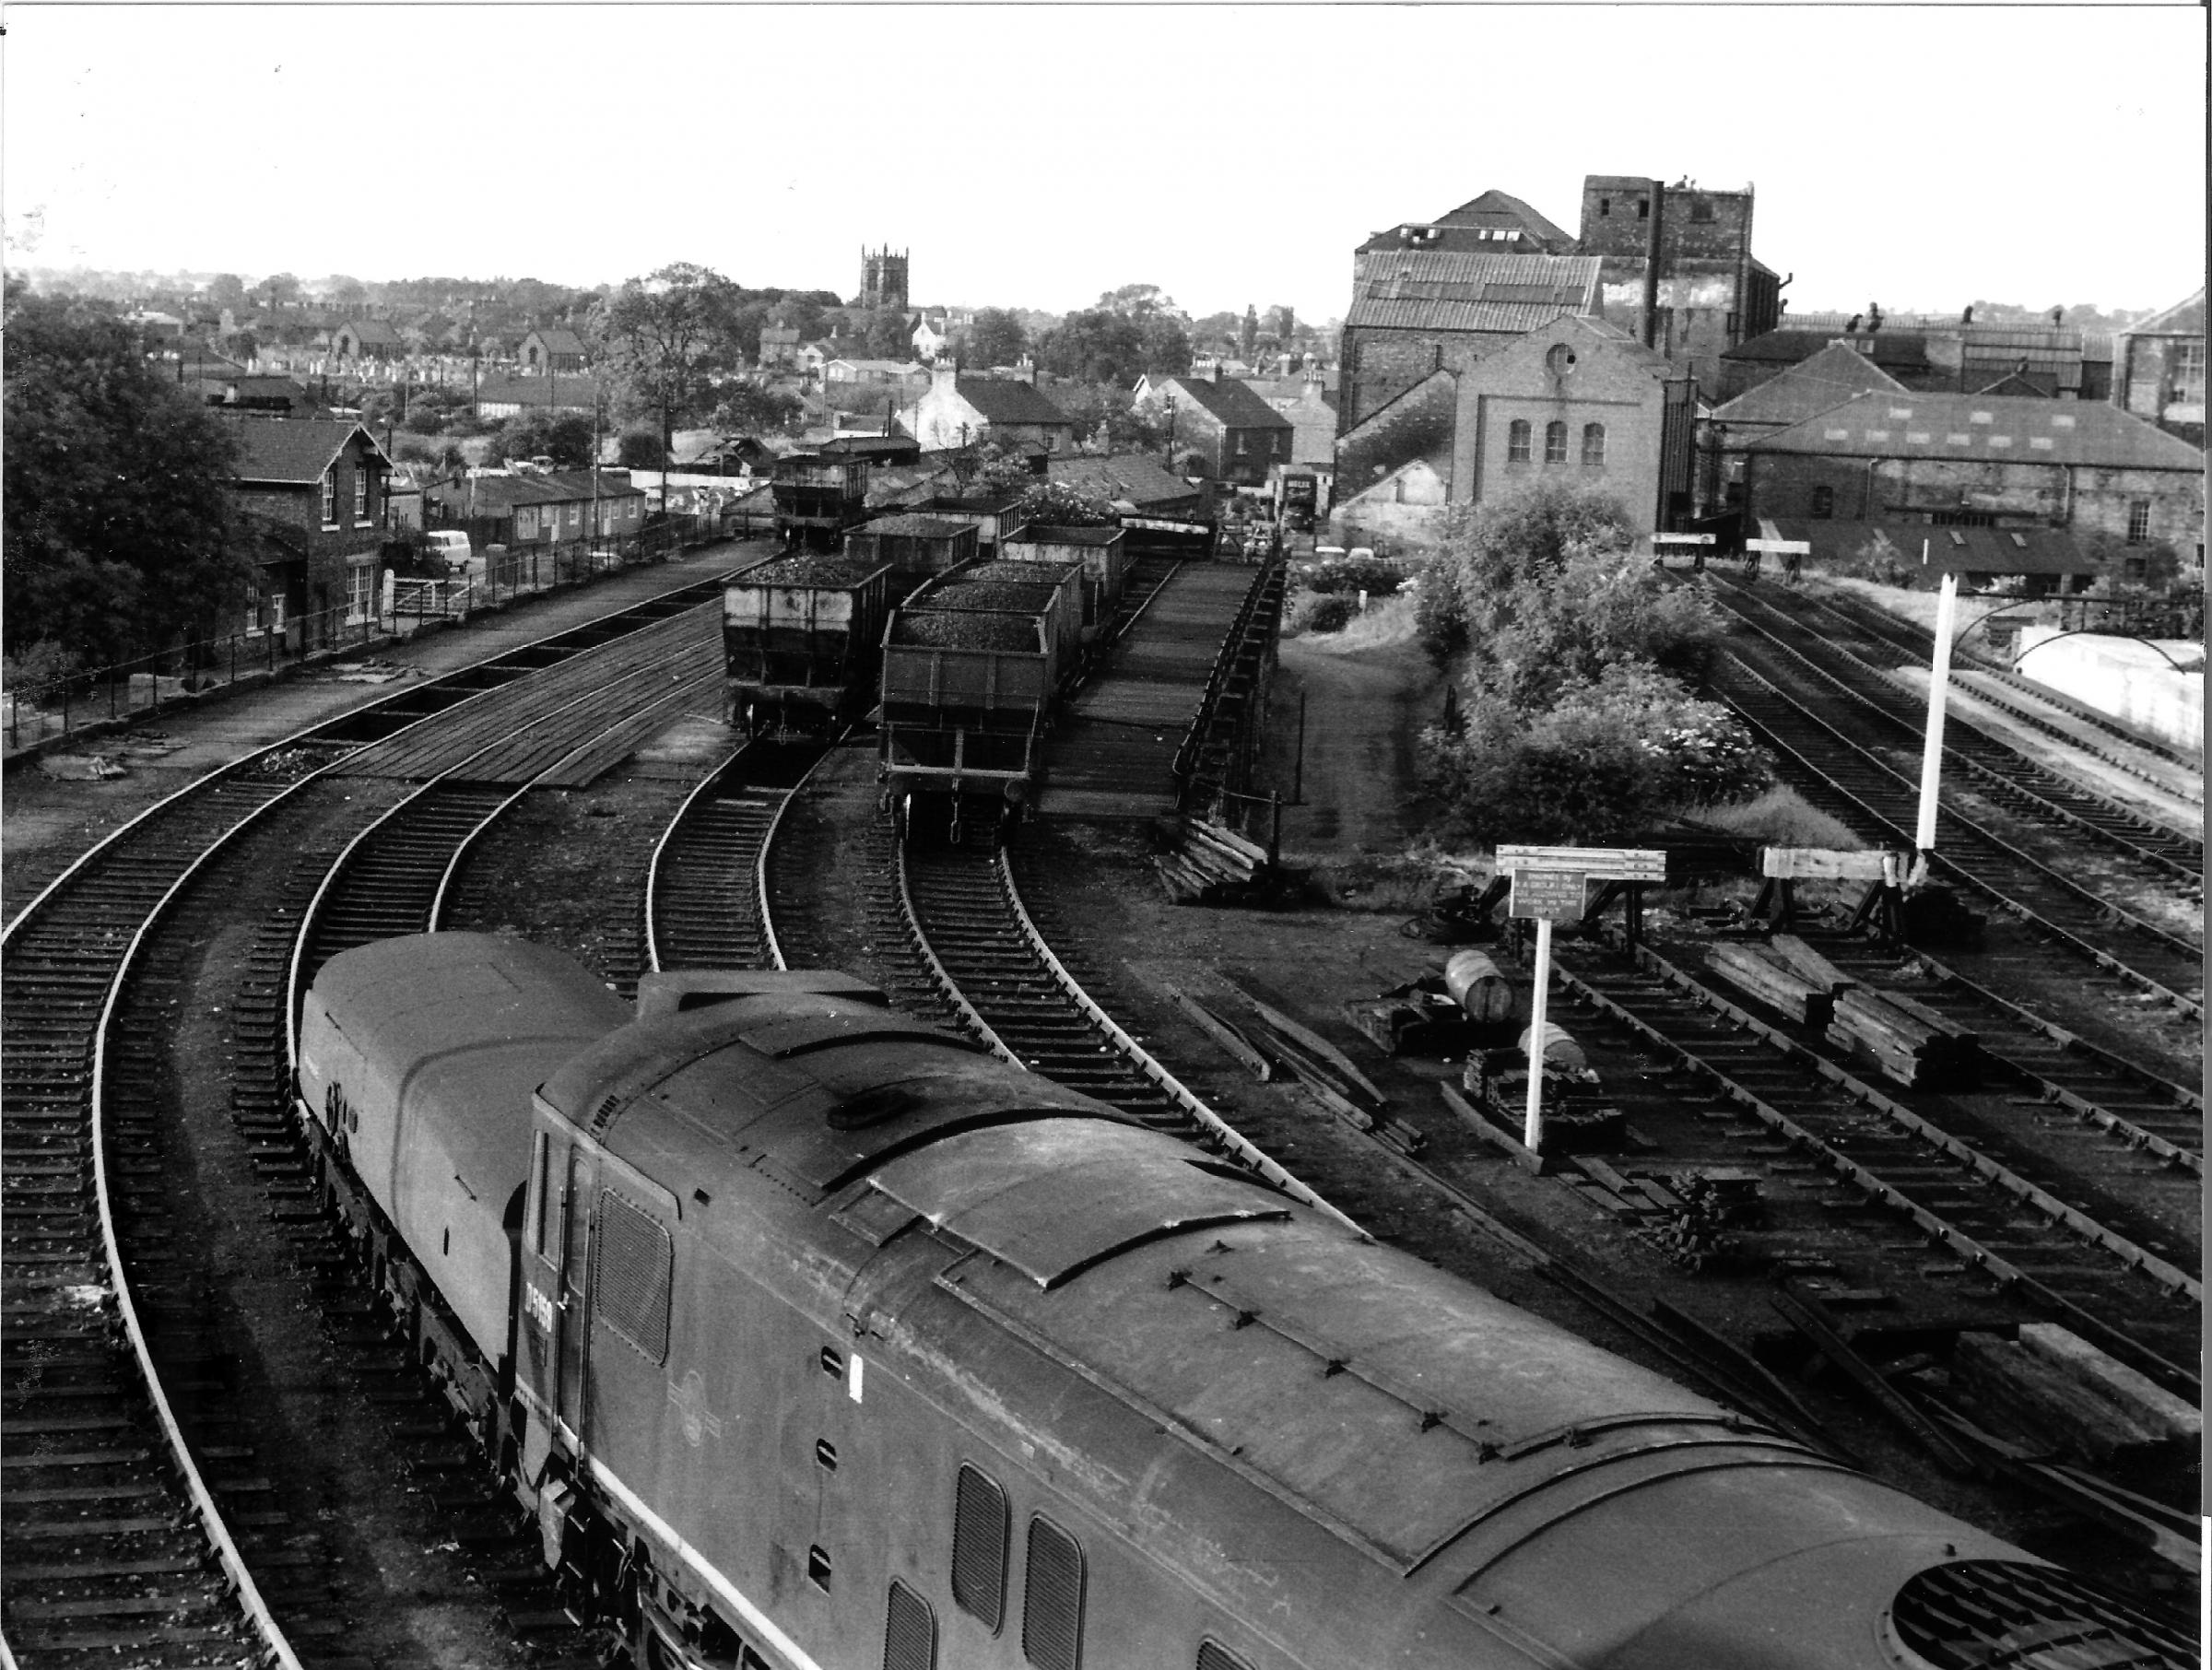 The view from the signal box at Northallerton station in 1964, looking north-west into the town, showing the coal drops on the left and the linoleum factory on the right